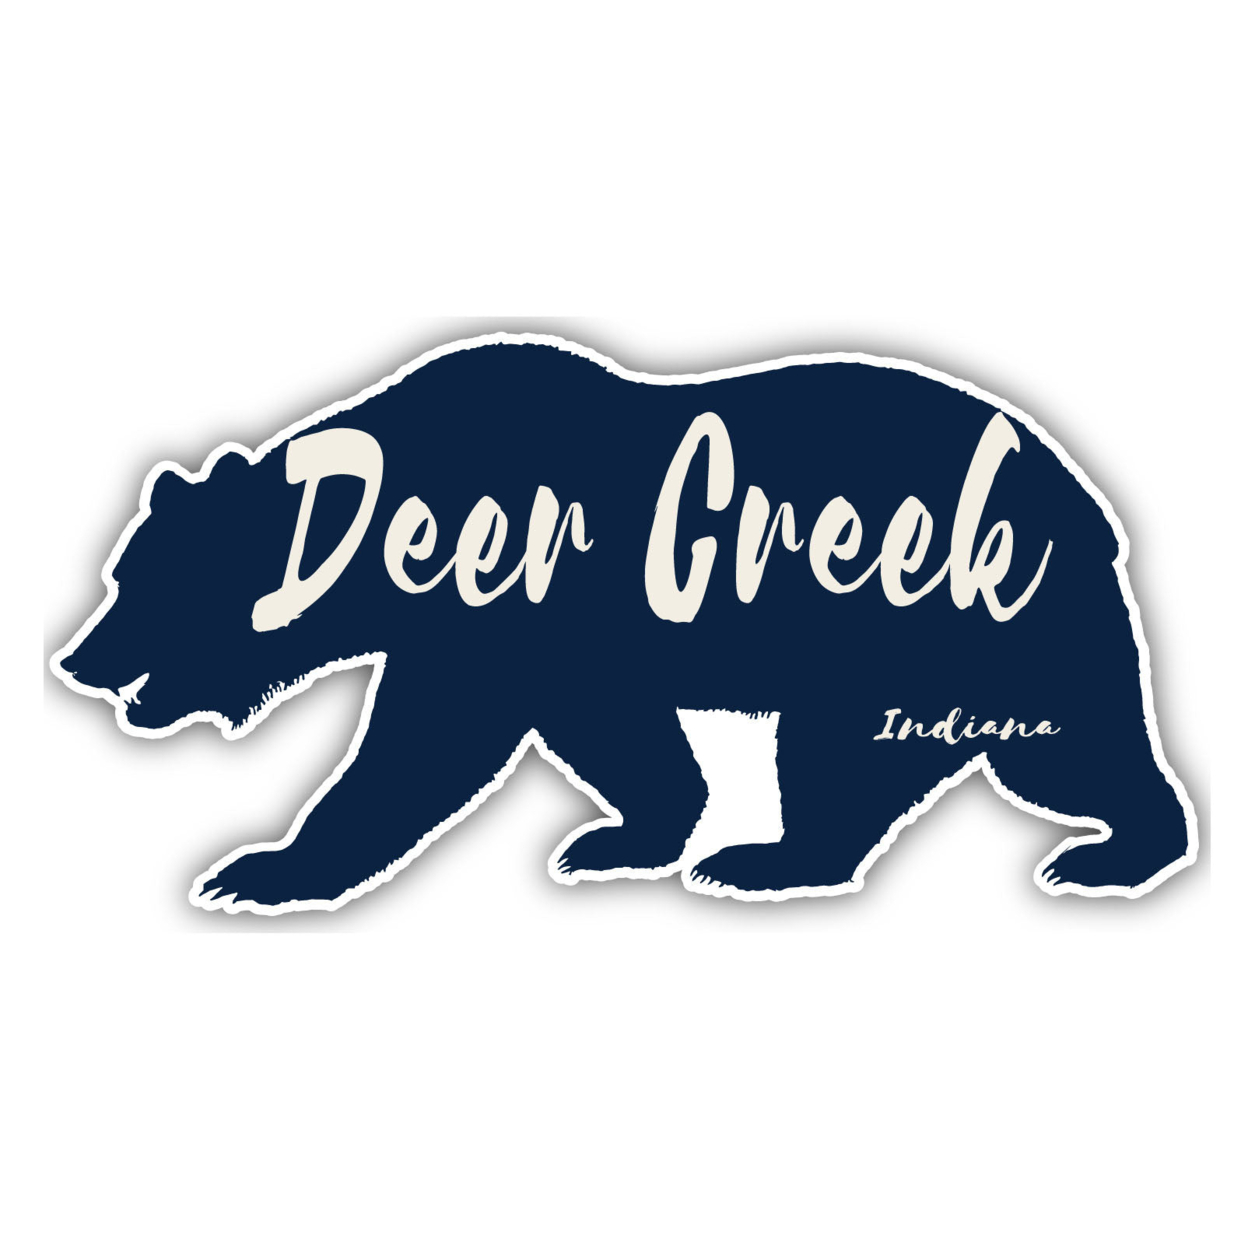 Deer Creek Indiana Souvenir Decorative Stickers (Choose Theme And Size) - Single Unit, 2-Inch, Great Outdoors